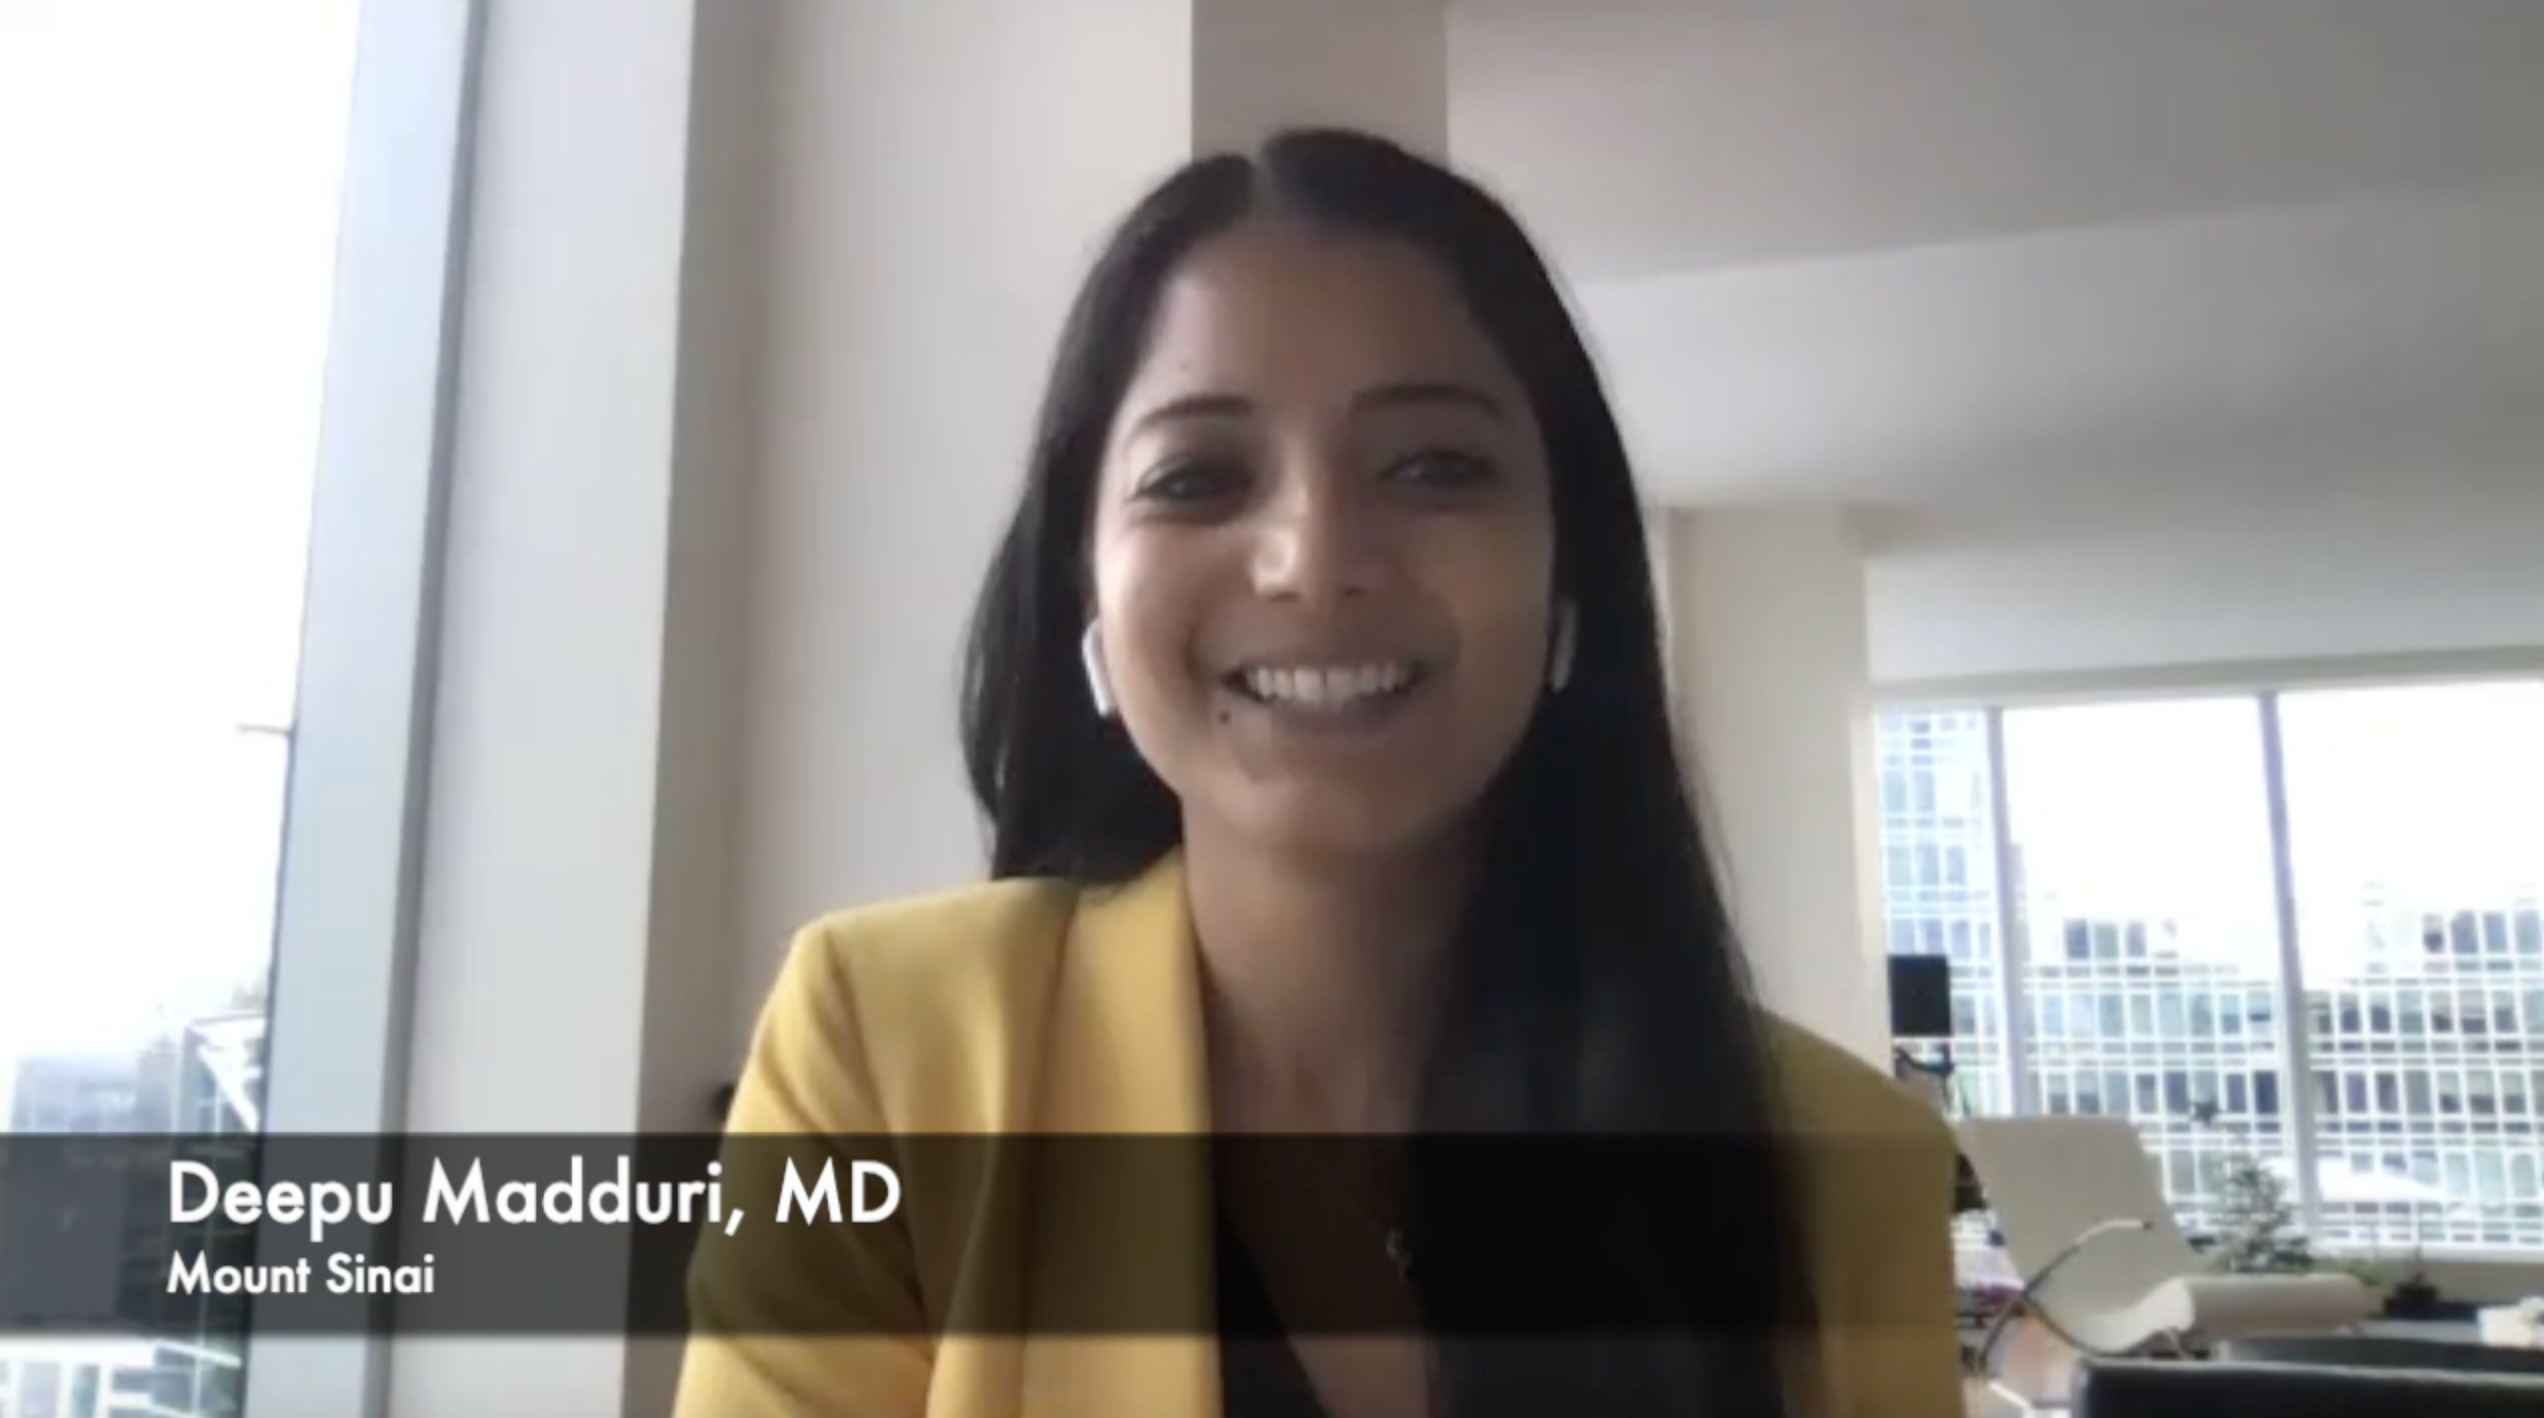 Deepu Madduri, MD, on the Design of the Phase 1b/2 CARTITUDE-1 Trial